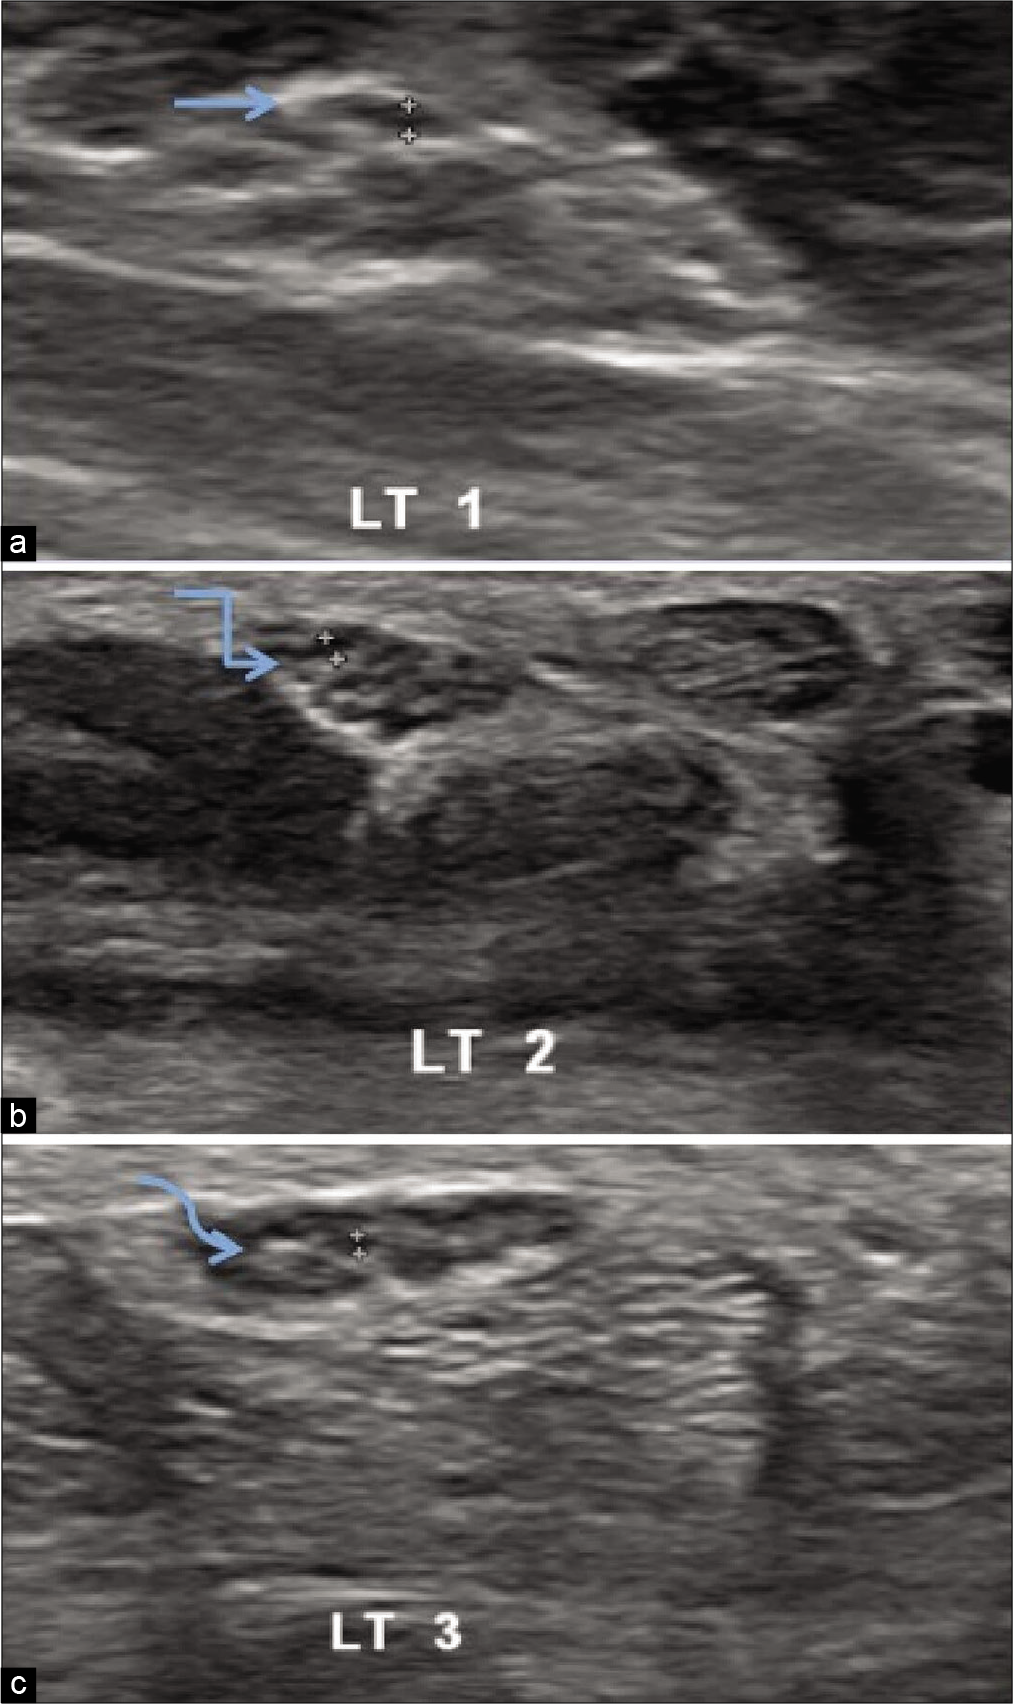 Ultrasonography of the left median nerve of healthy volunteer showing hypoechoic median nerve fascicle thickness at three levels in distal forearm (a) Maximum thickness 0.041 cm at the level of pronator quadratus(straight arrow), (b) maximum thickness 0.050 cm proximal to carpal tunnel inlet(bent arrow), (c) maximum thickness 0.033 cm distal to carpal tunnel outlet (curved arrow).